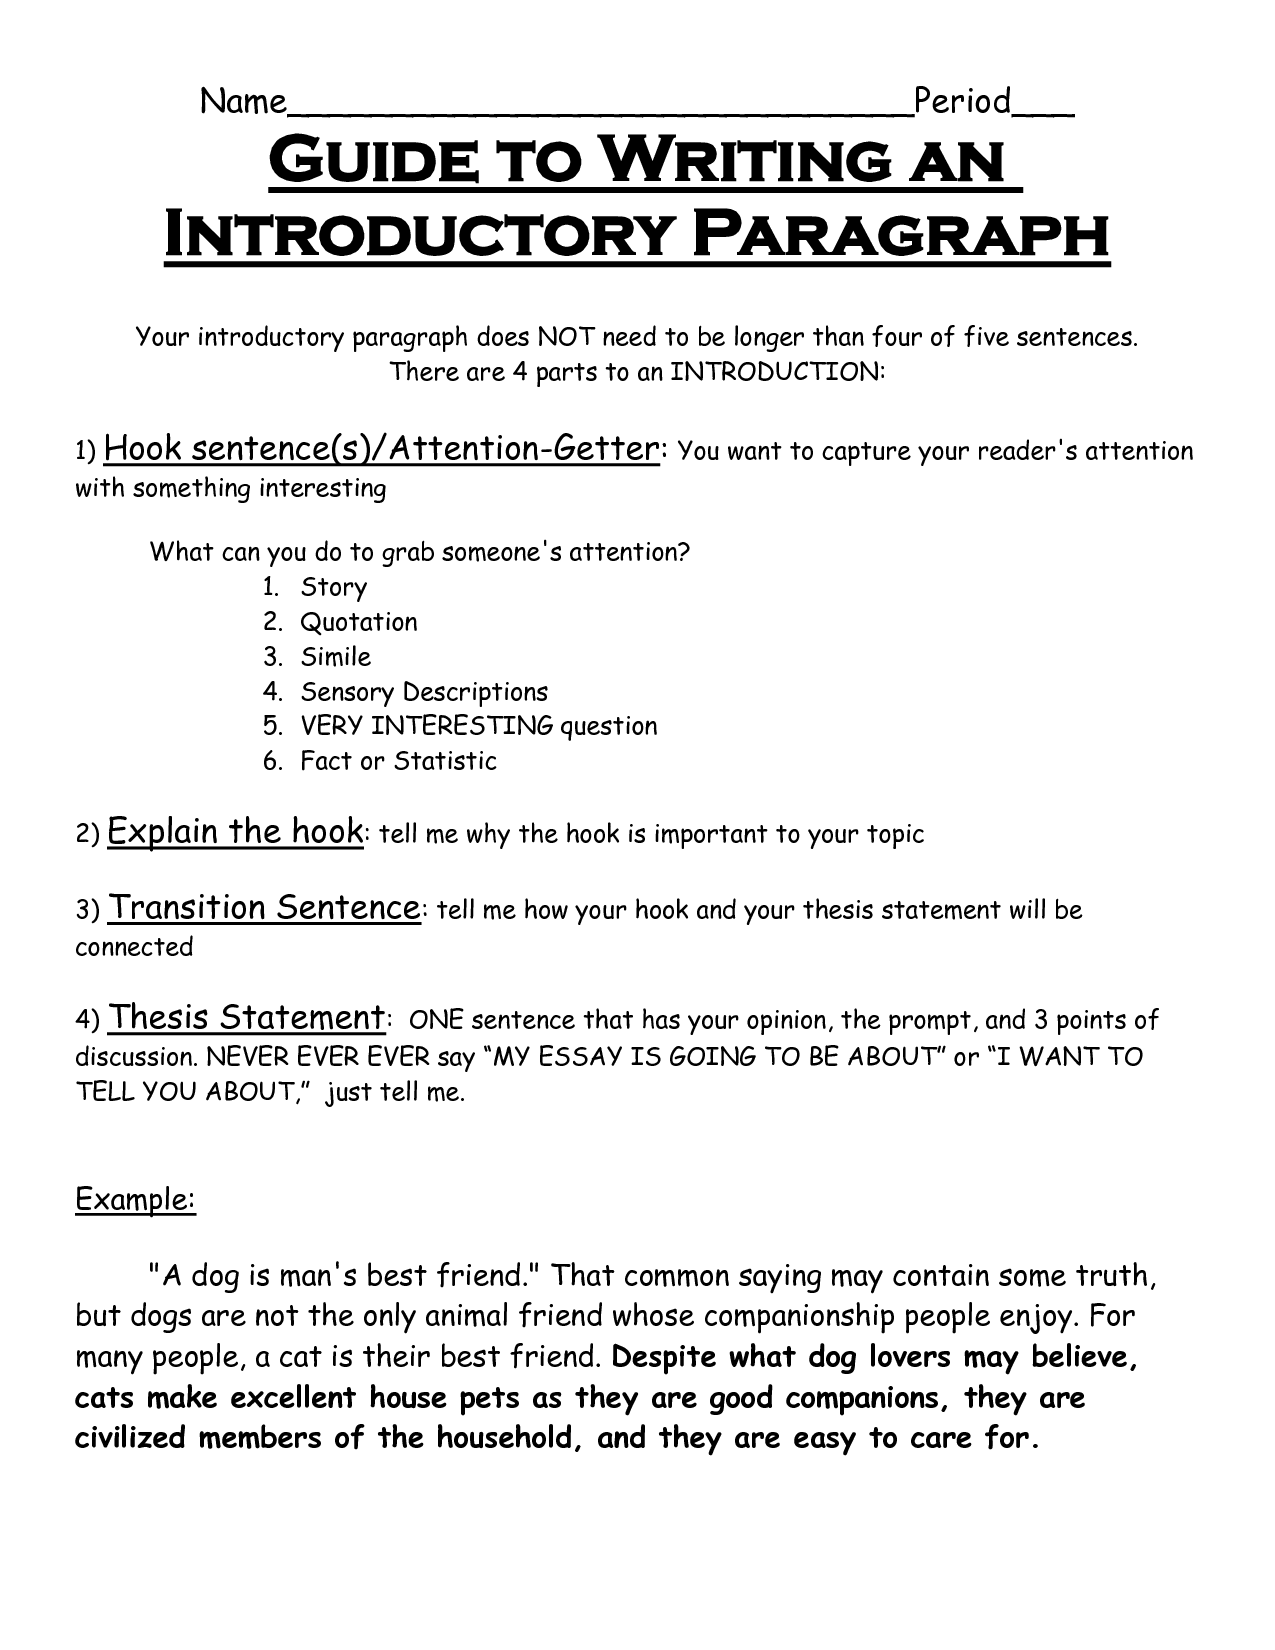 What is the introduction of an essay